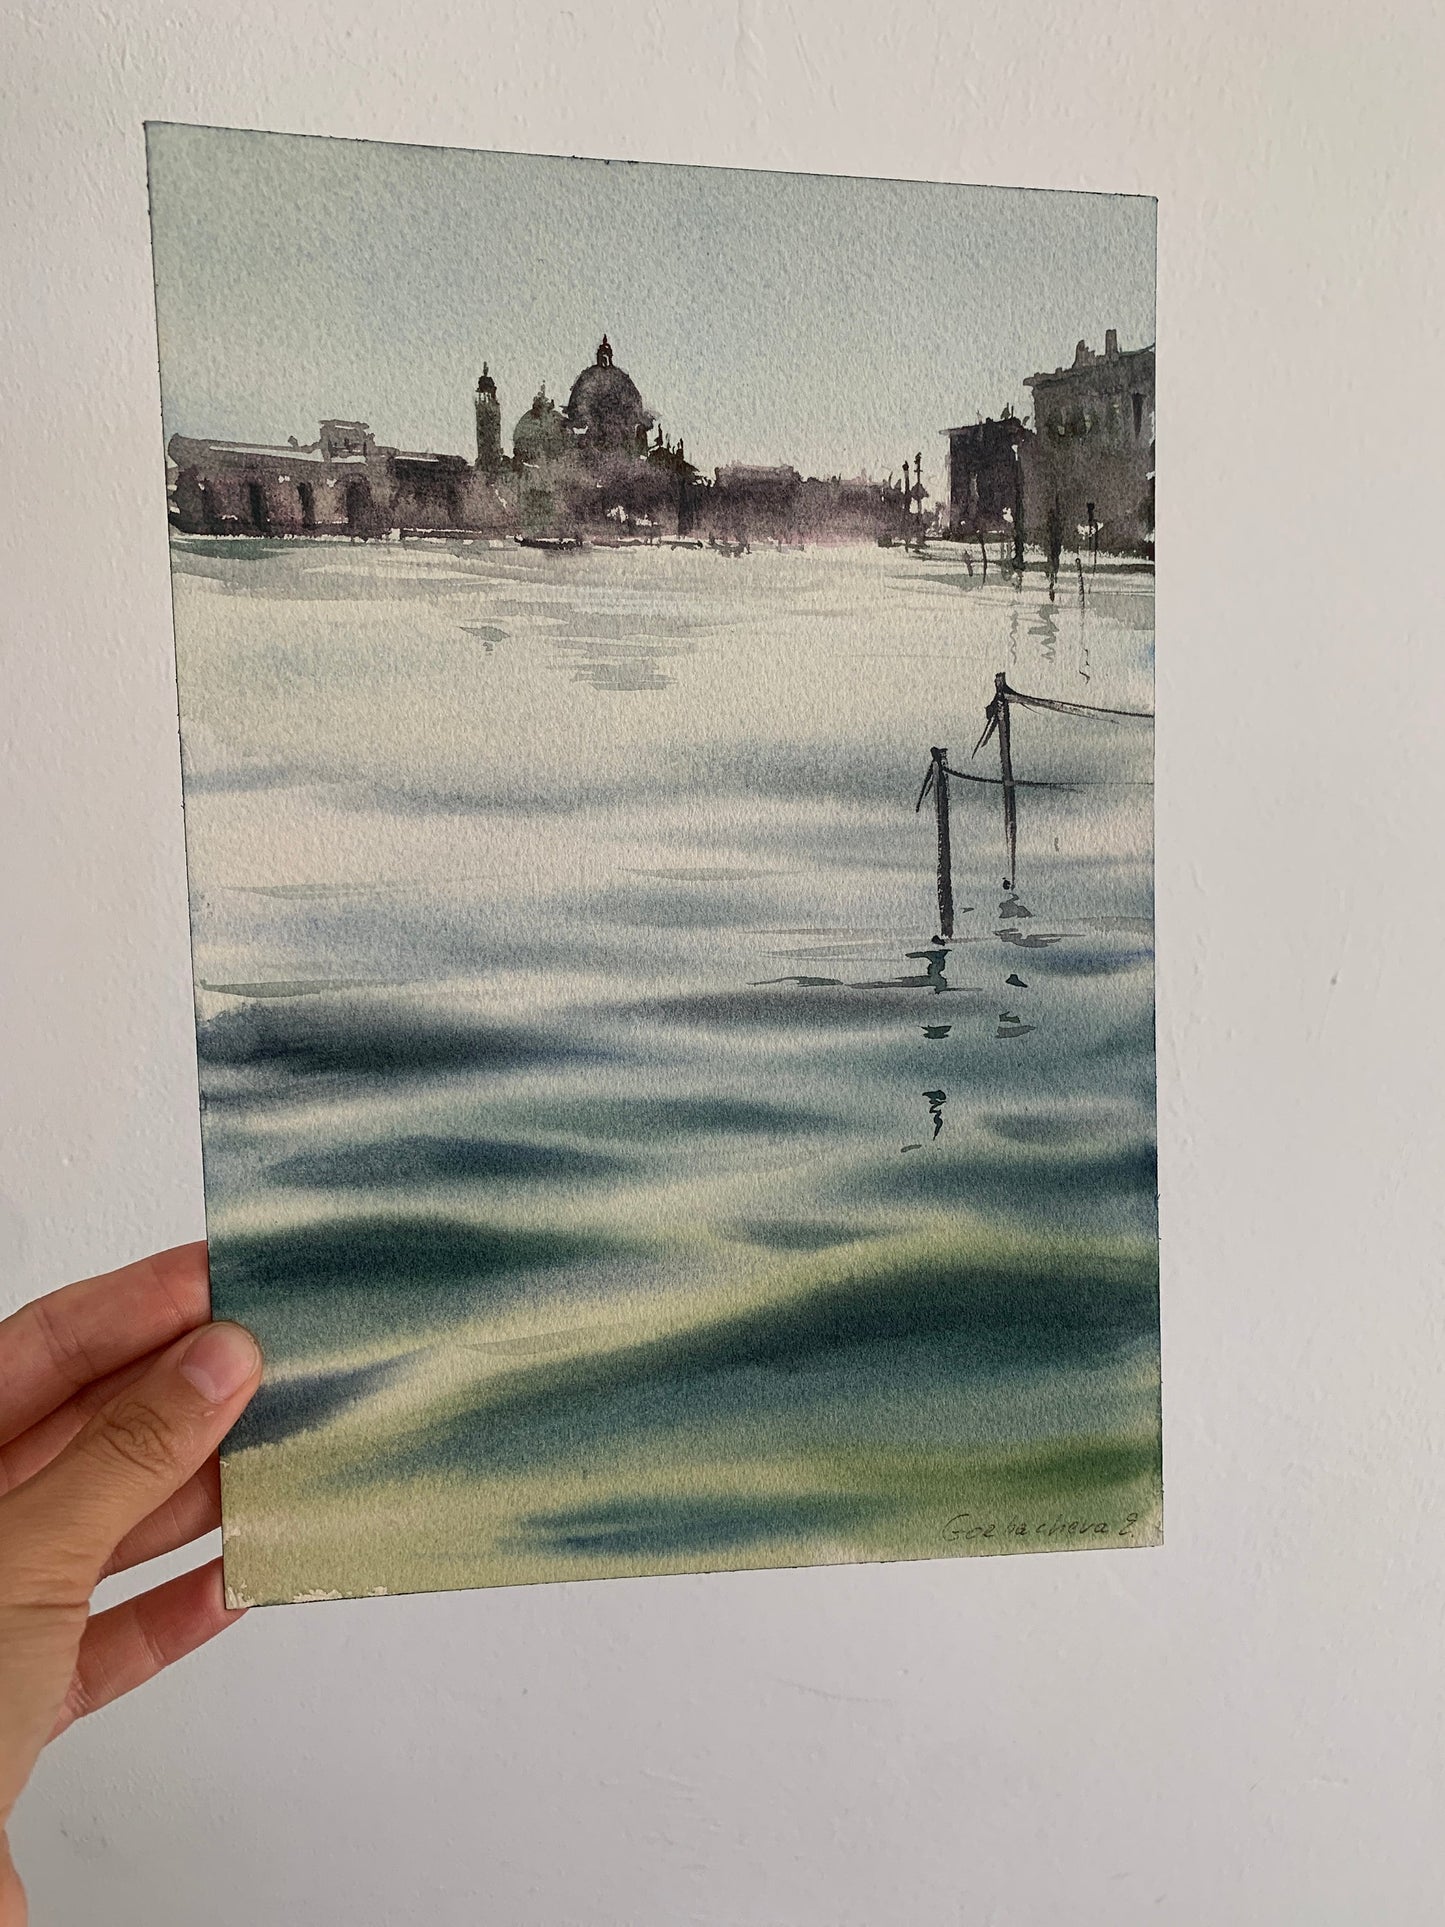 Venice Small Painting Watercolor Original, Italian Cityscape, Architecture Wall Art, Gift For Her, Gondola, Grand Canal